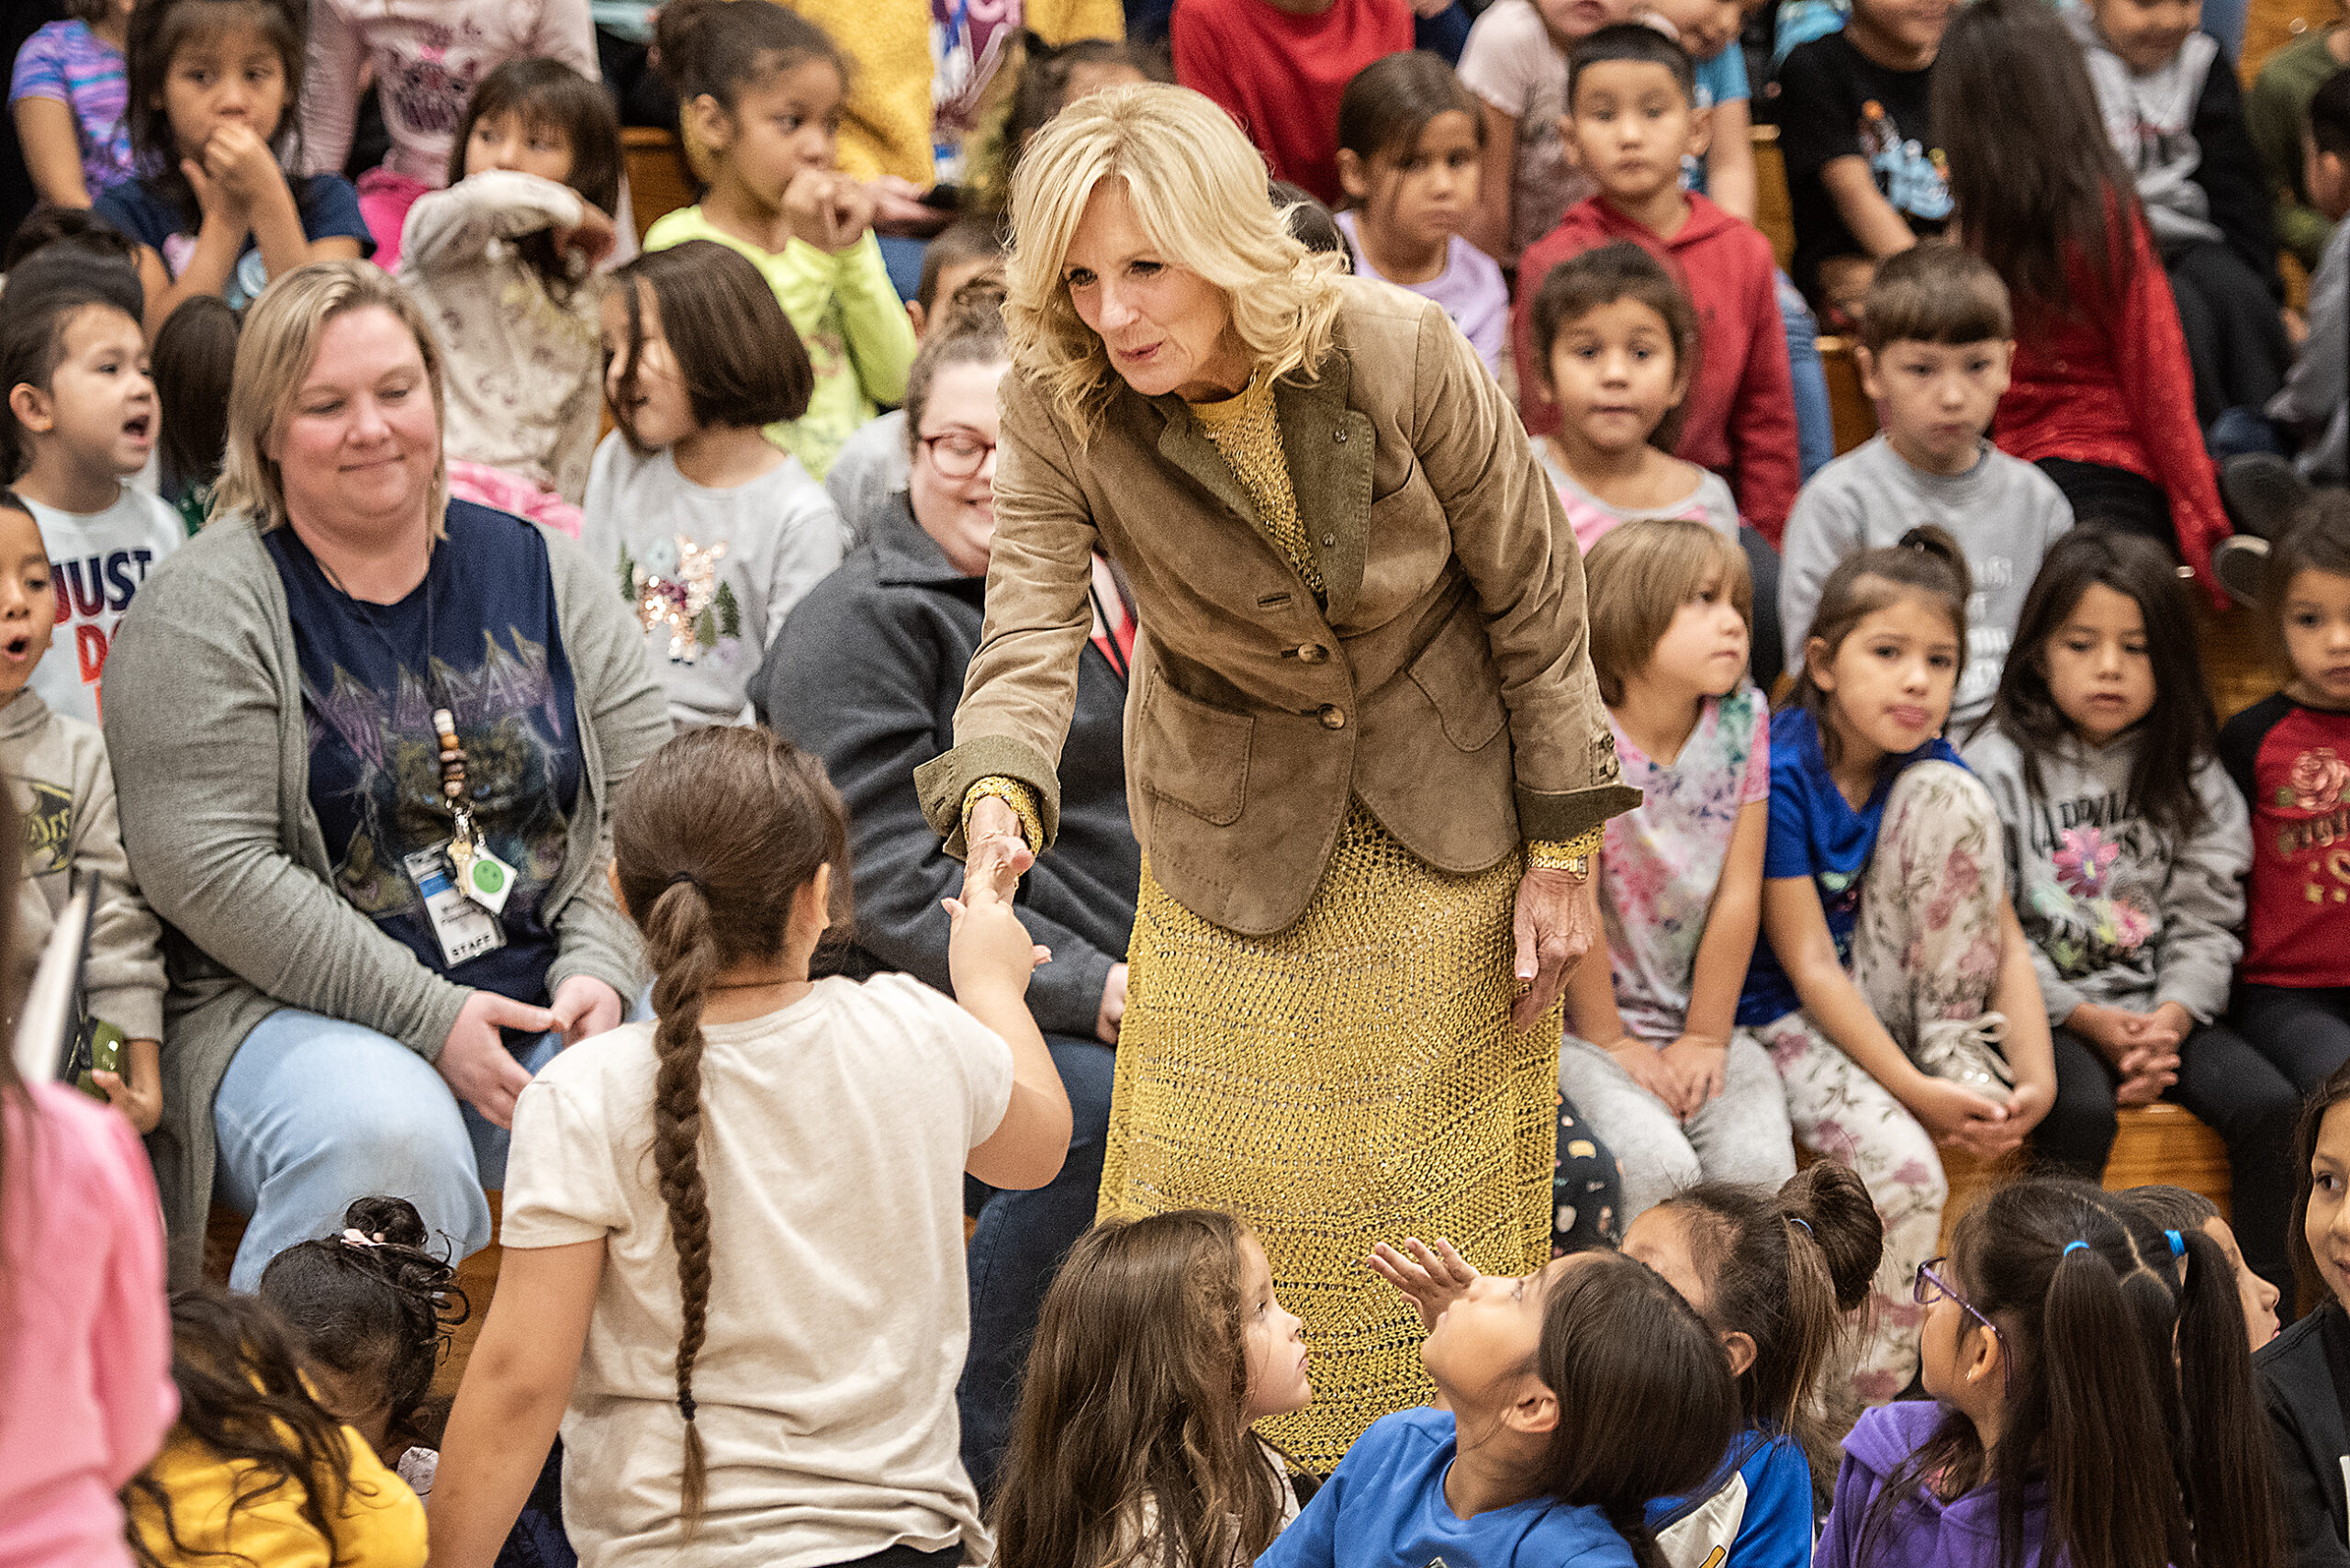 Jill Biden smiles as she leans over to shake the hand of a small girl in a crowded gym of excited children.